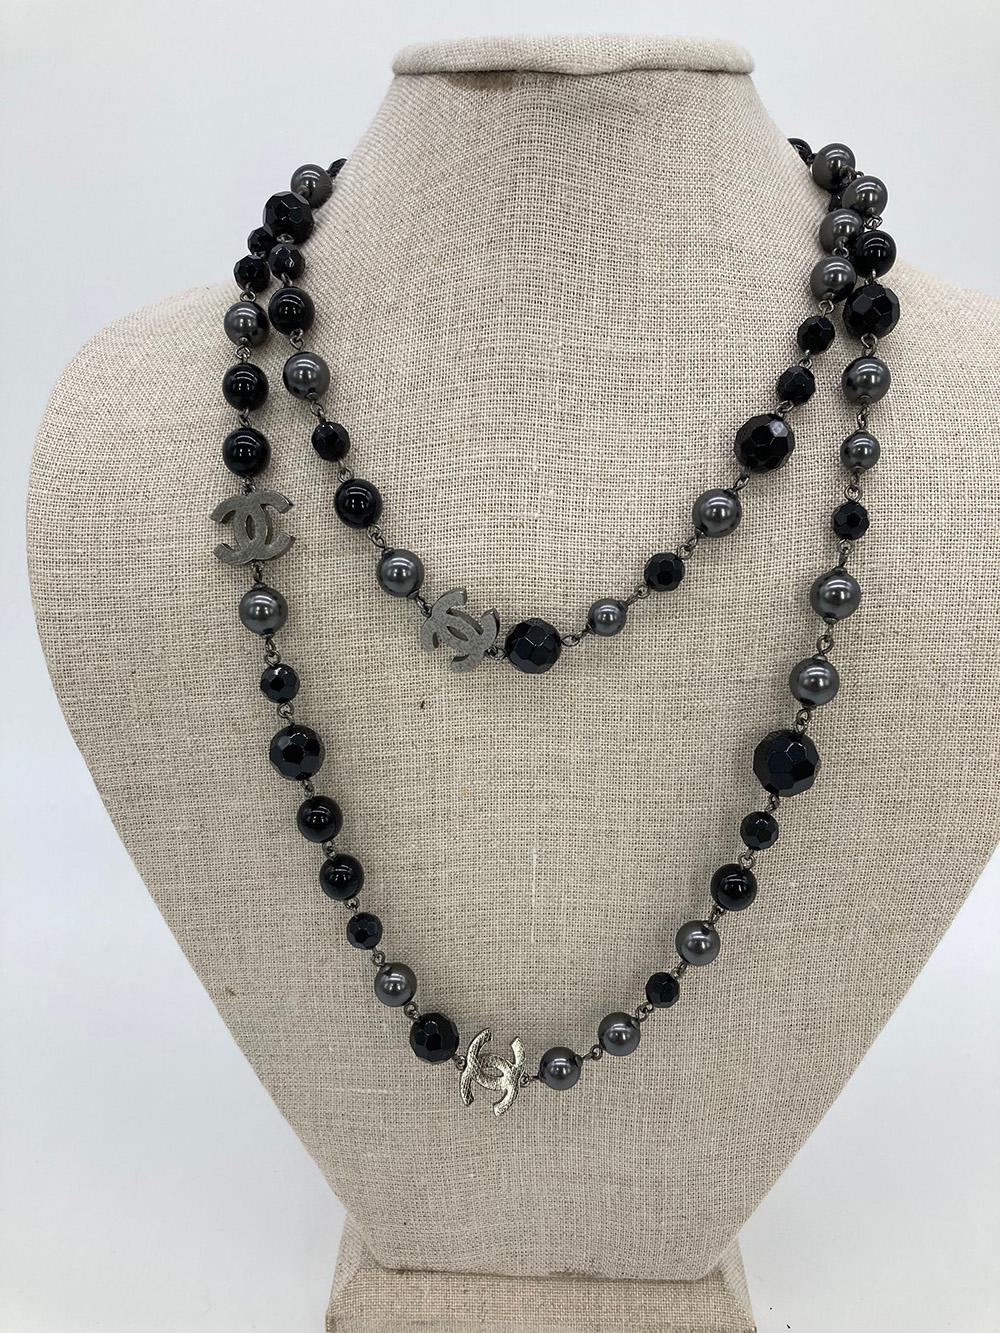 Chanel Black Beaded CC Charm Necklace in excellent condition. Black and gunmetal beads with etched gunmetal CC logos throughout. Lobster clasp closure. No chips, scuffs or stains. Measures 42